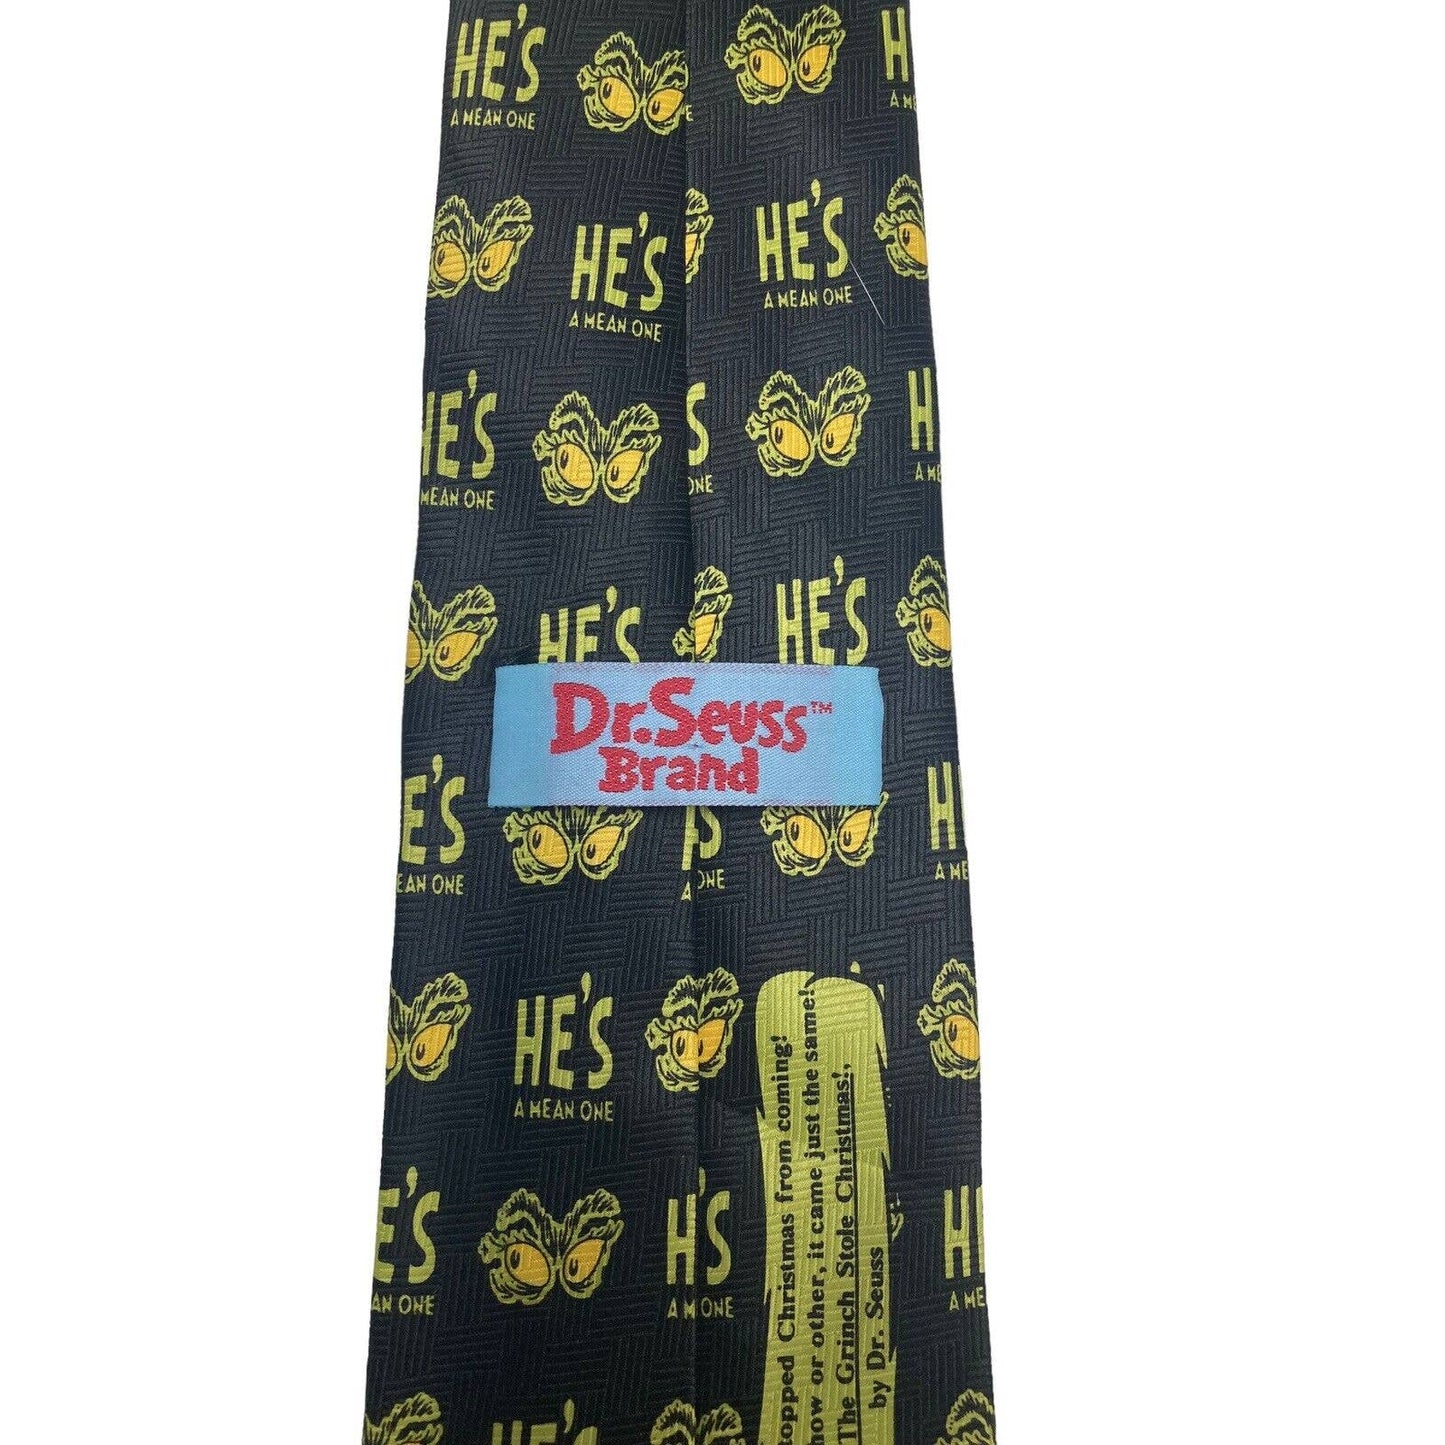 Dr Seuss How The Grinch Stole Christmas Your A Mean One Eyes Necktie Novelty